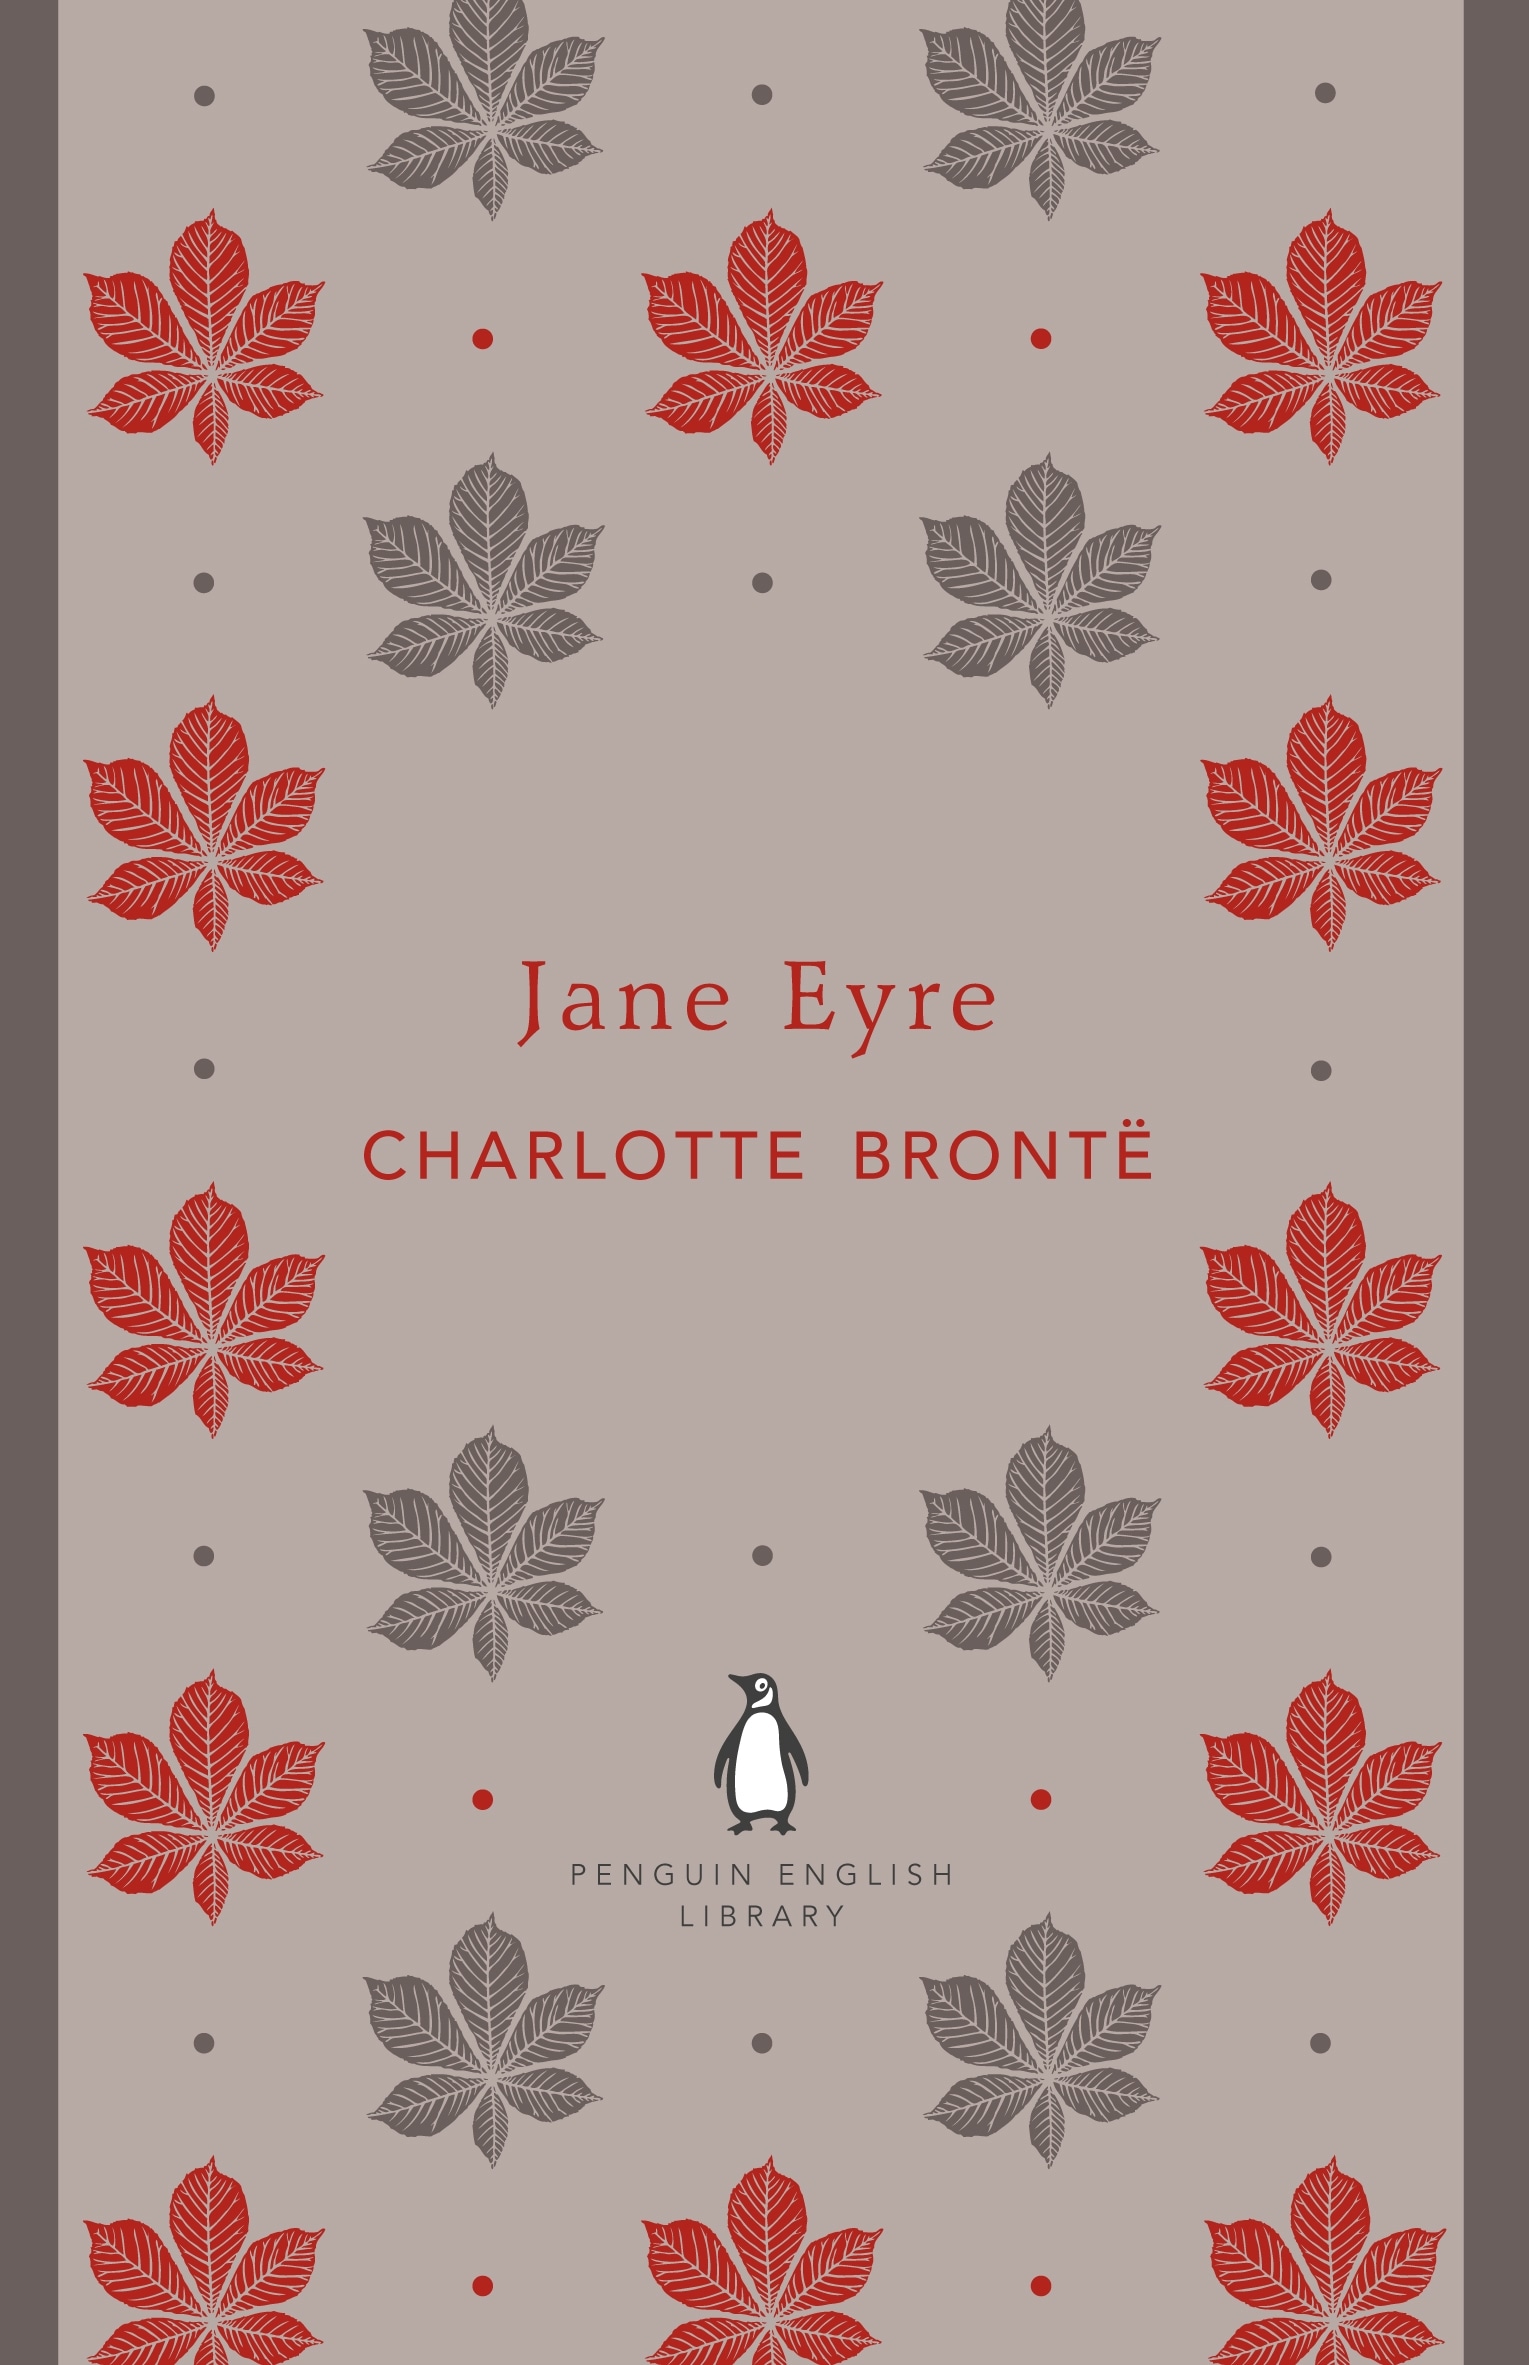 Book “Jane Eyre” by Charlotte Bronte — April 26, 2012